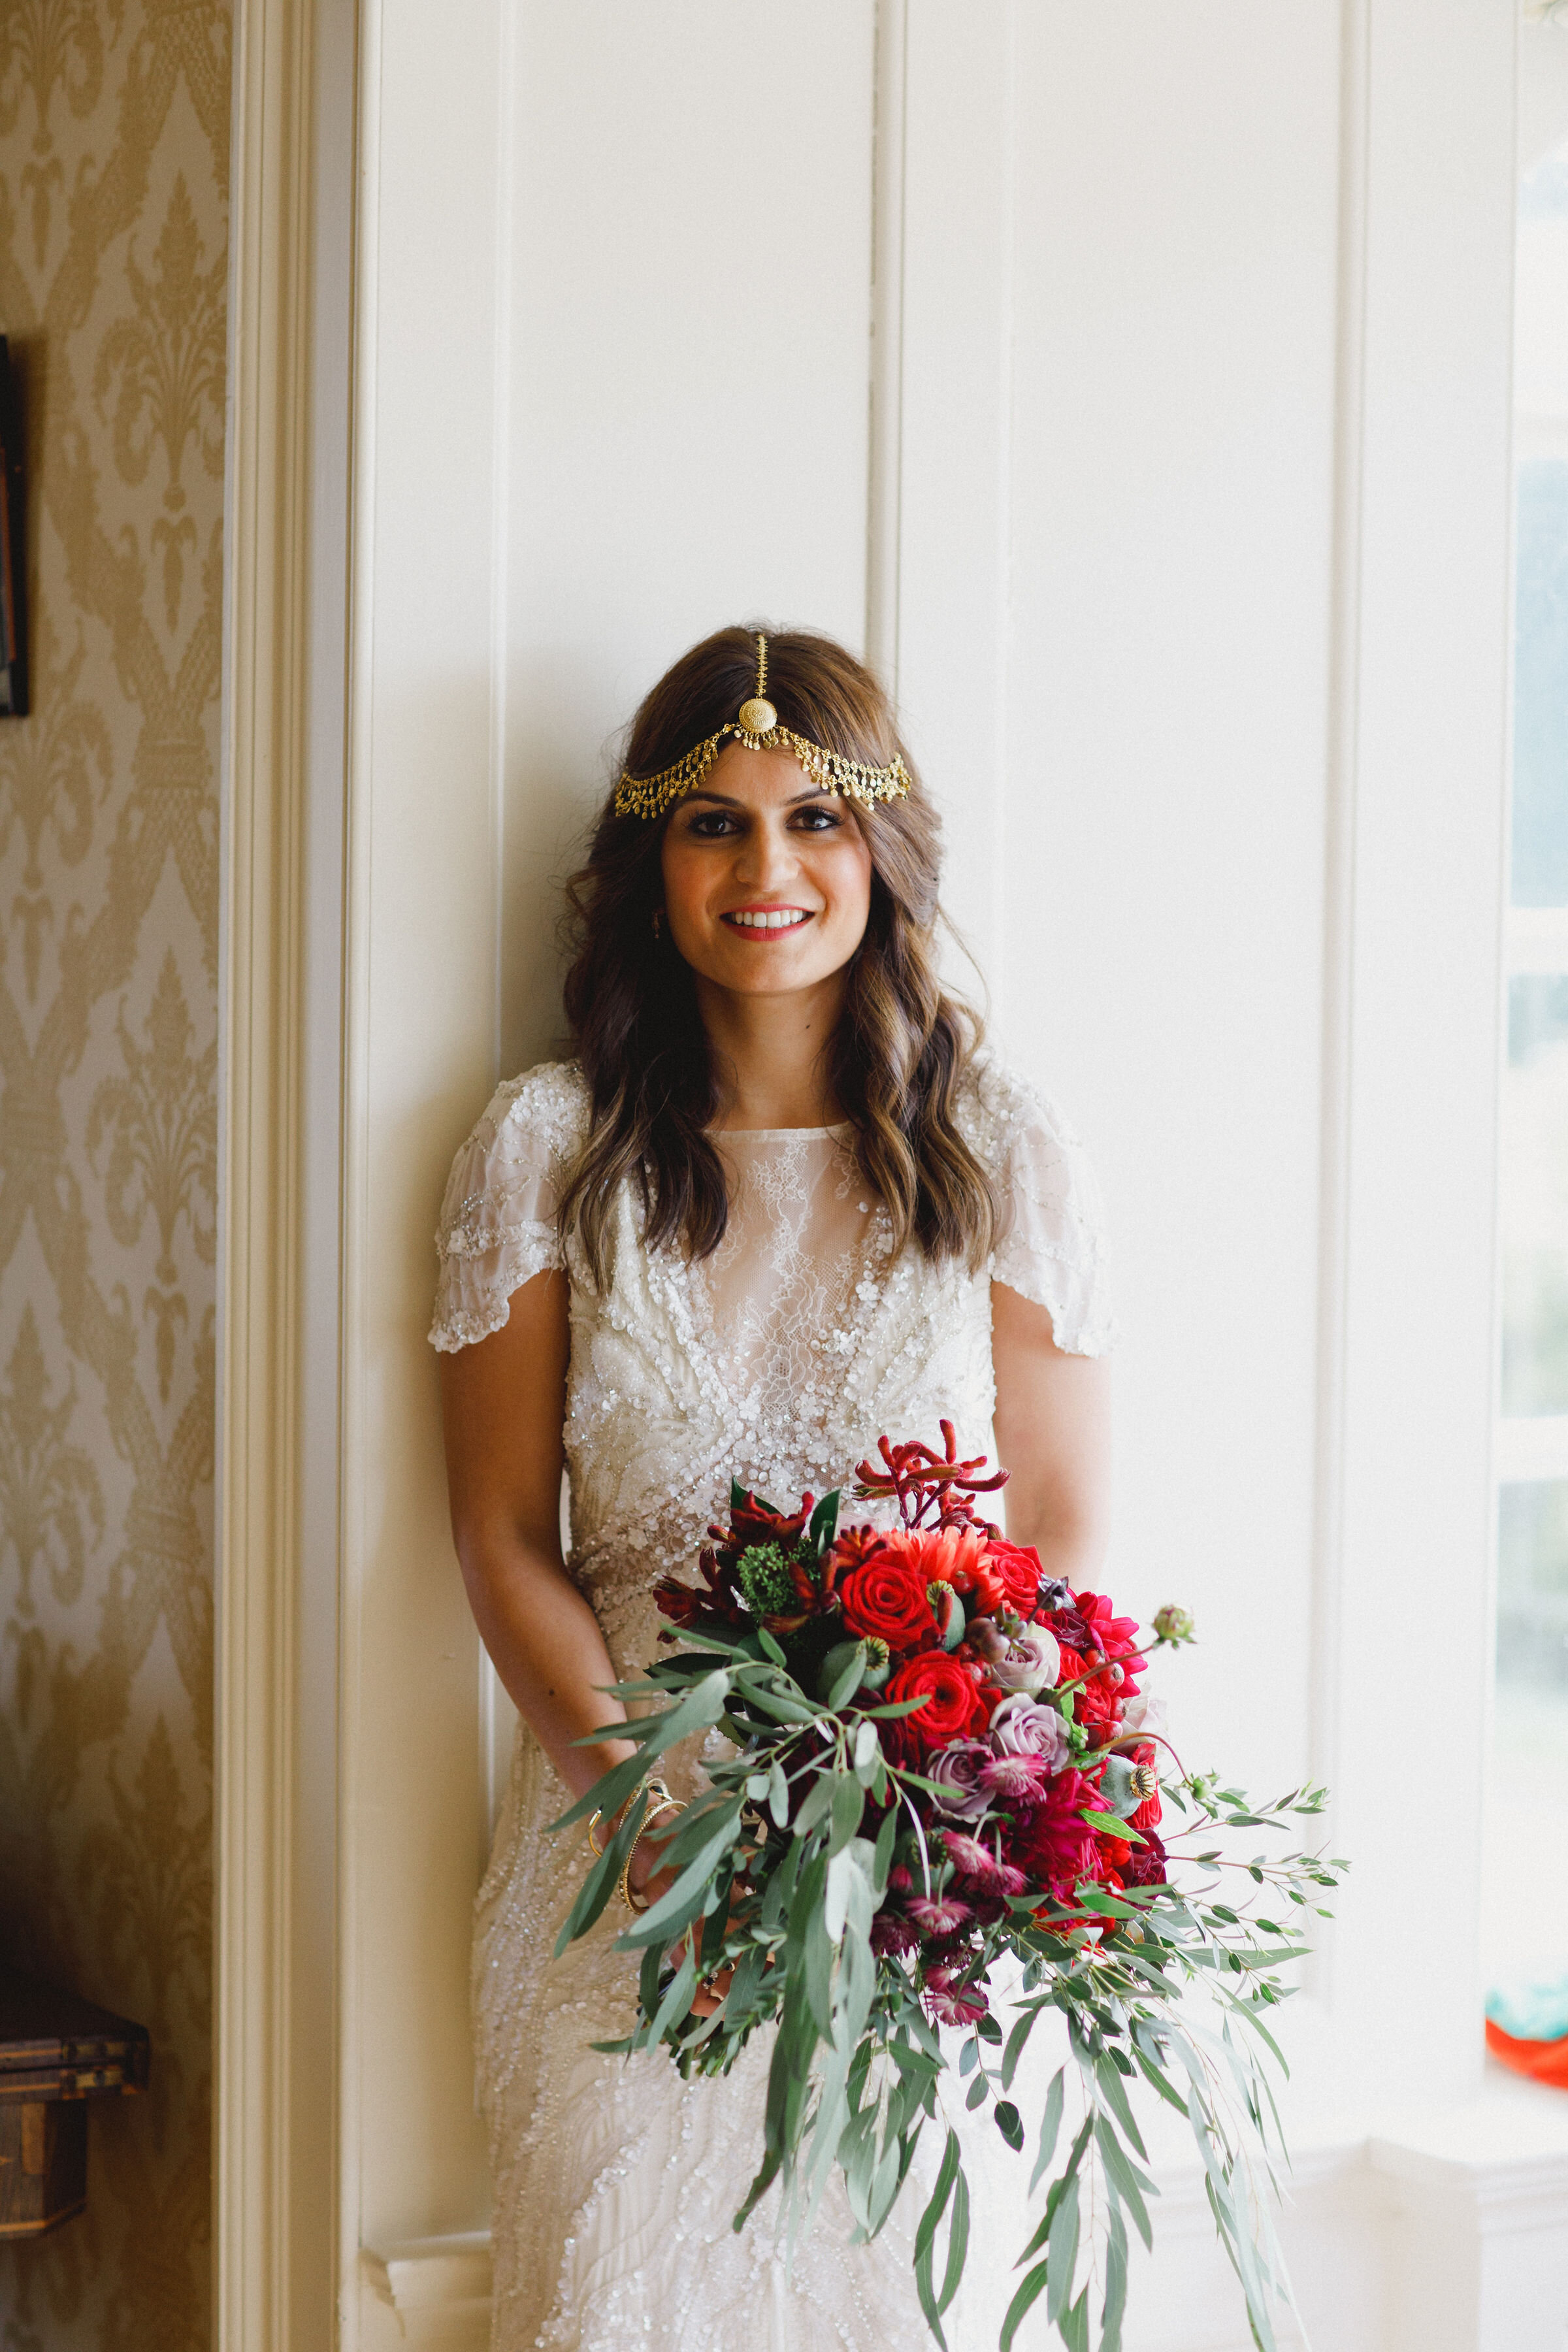 Brides wearing a beautiful beaded gown and holding red and green hand-tied bridal bouquet with lots of foliage.